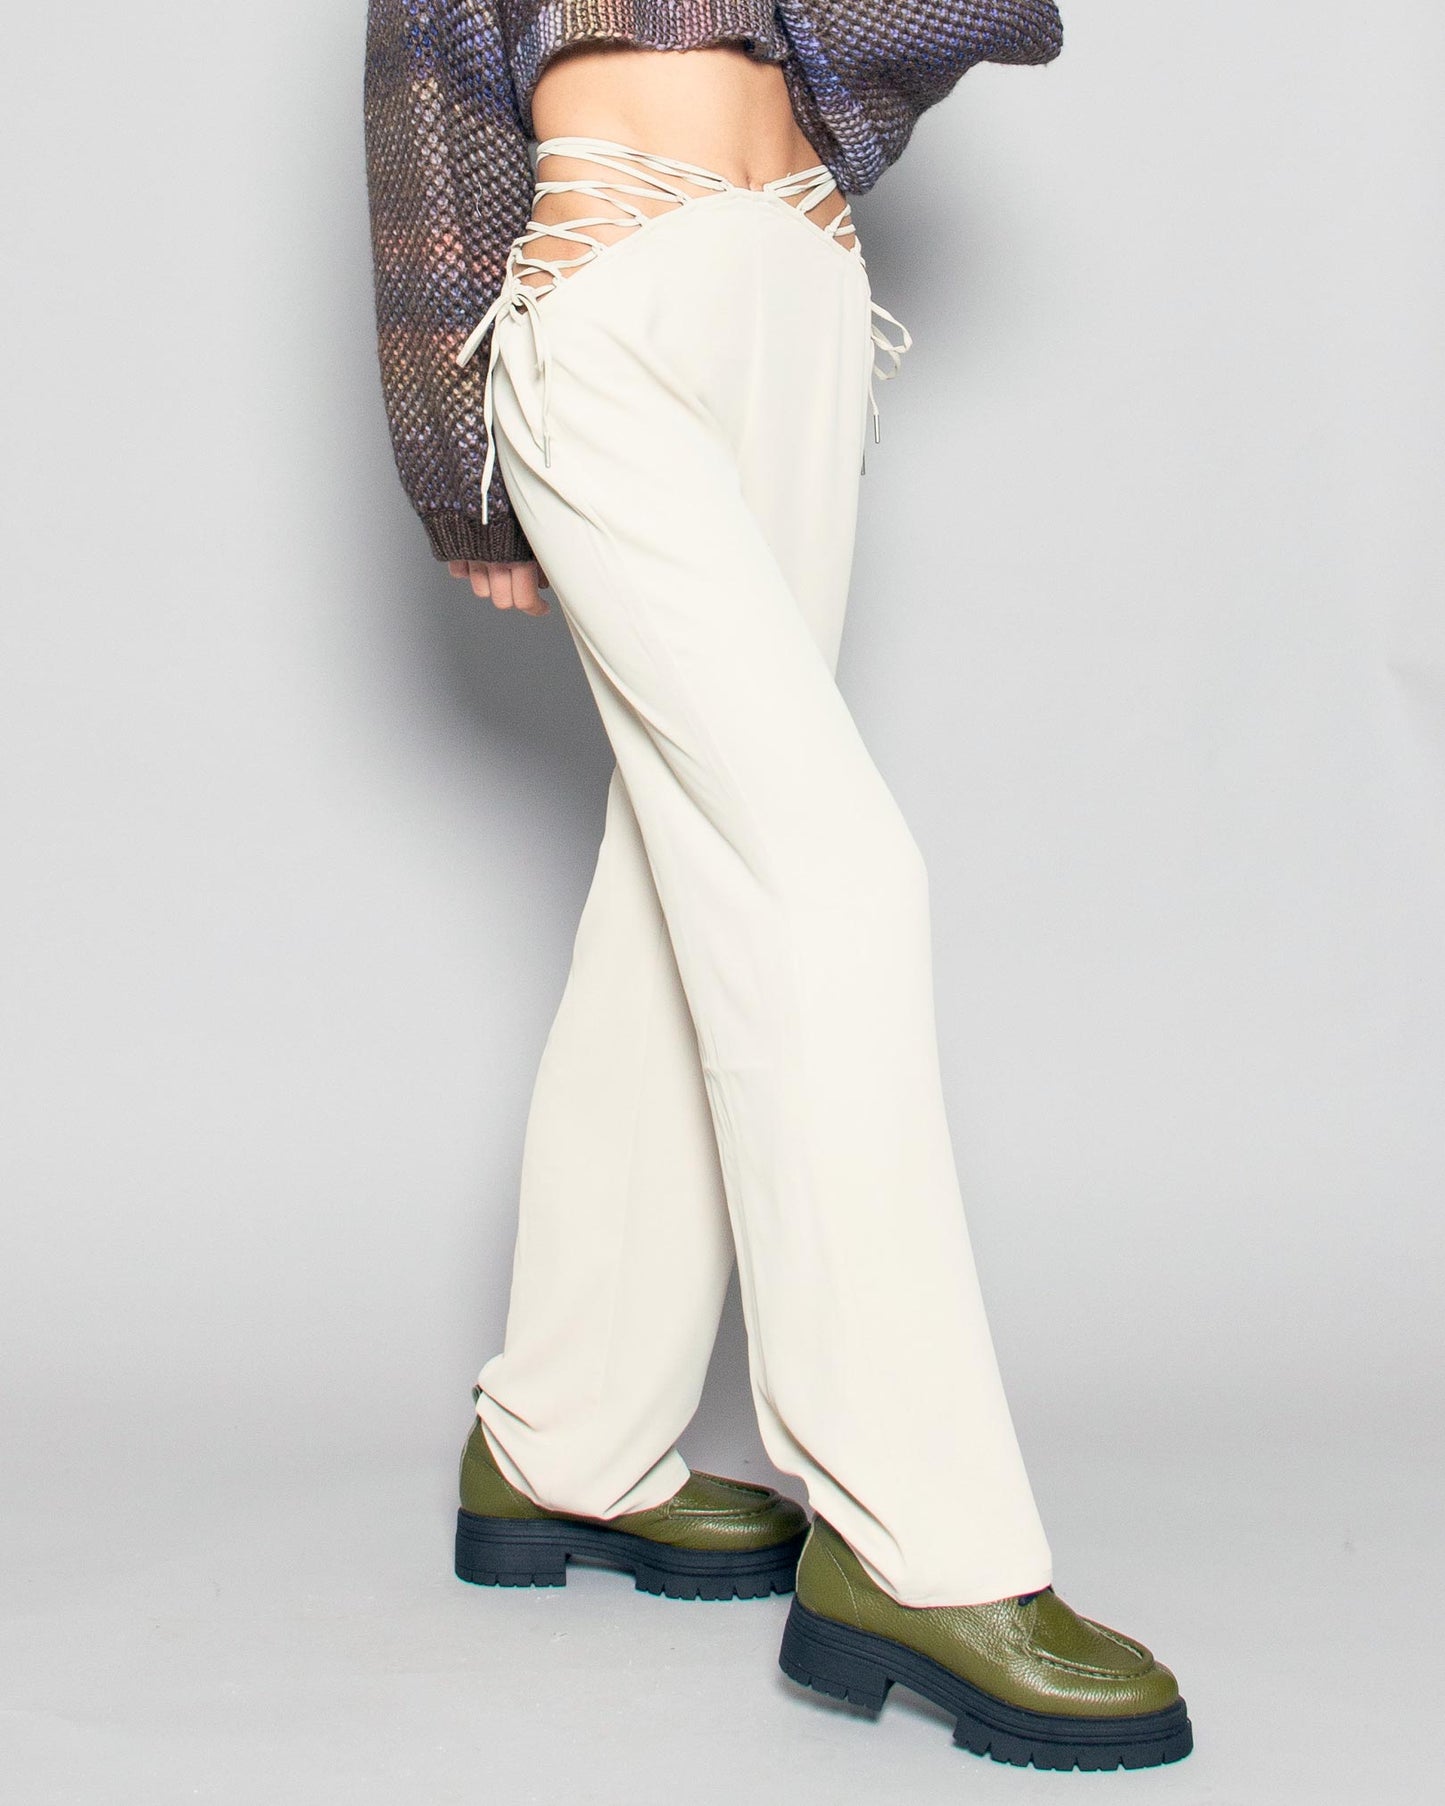 PERSONS Blake Lace Up Trousers in Sand available at Lahn.shop